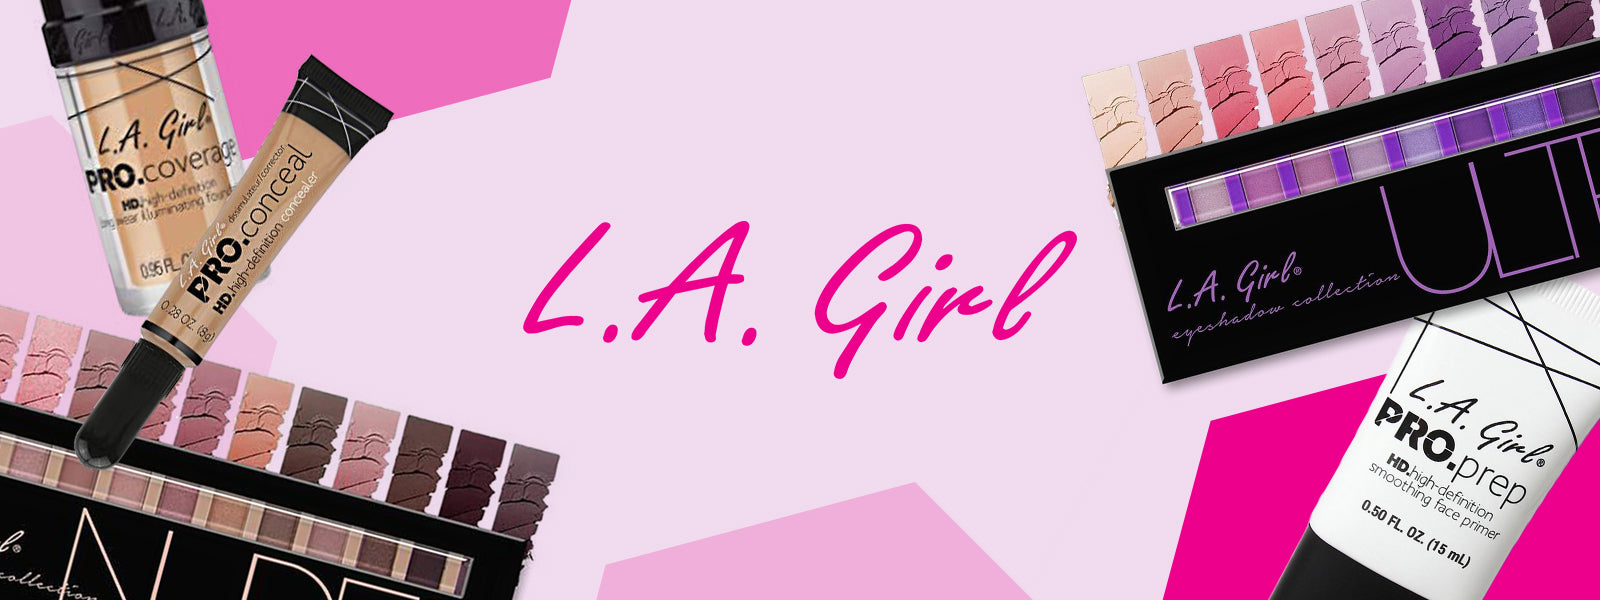 L.A. Girl HD Pro.Conceal Flat White Corrector